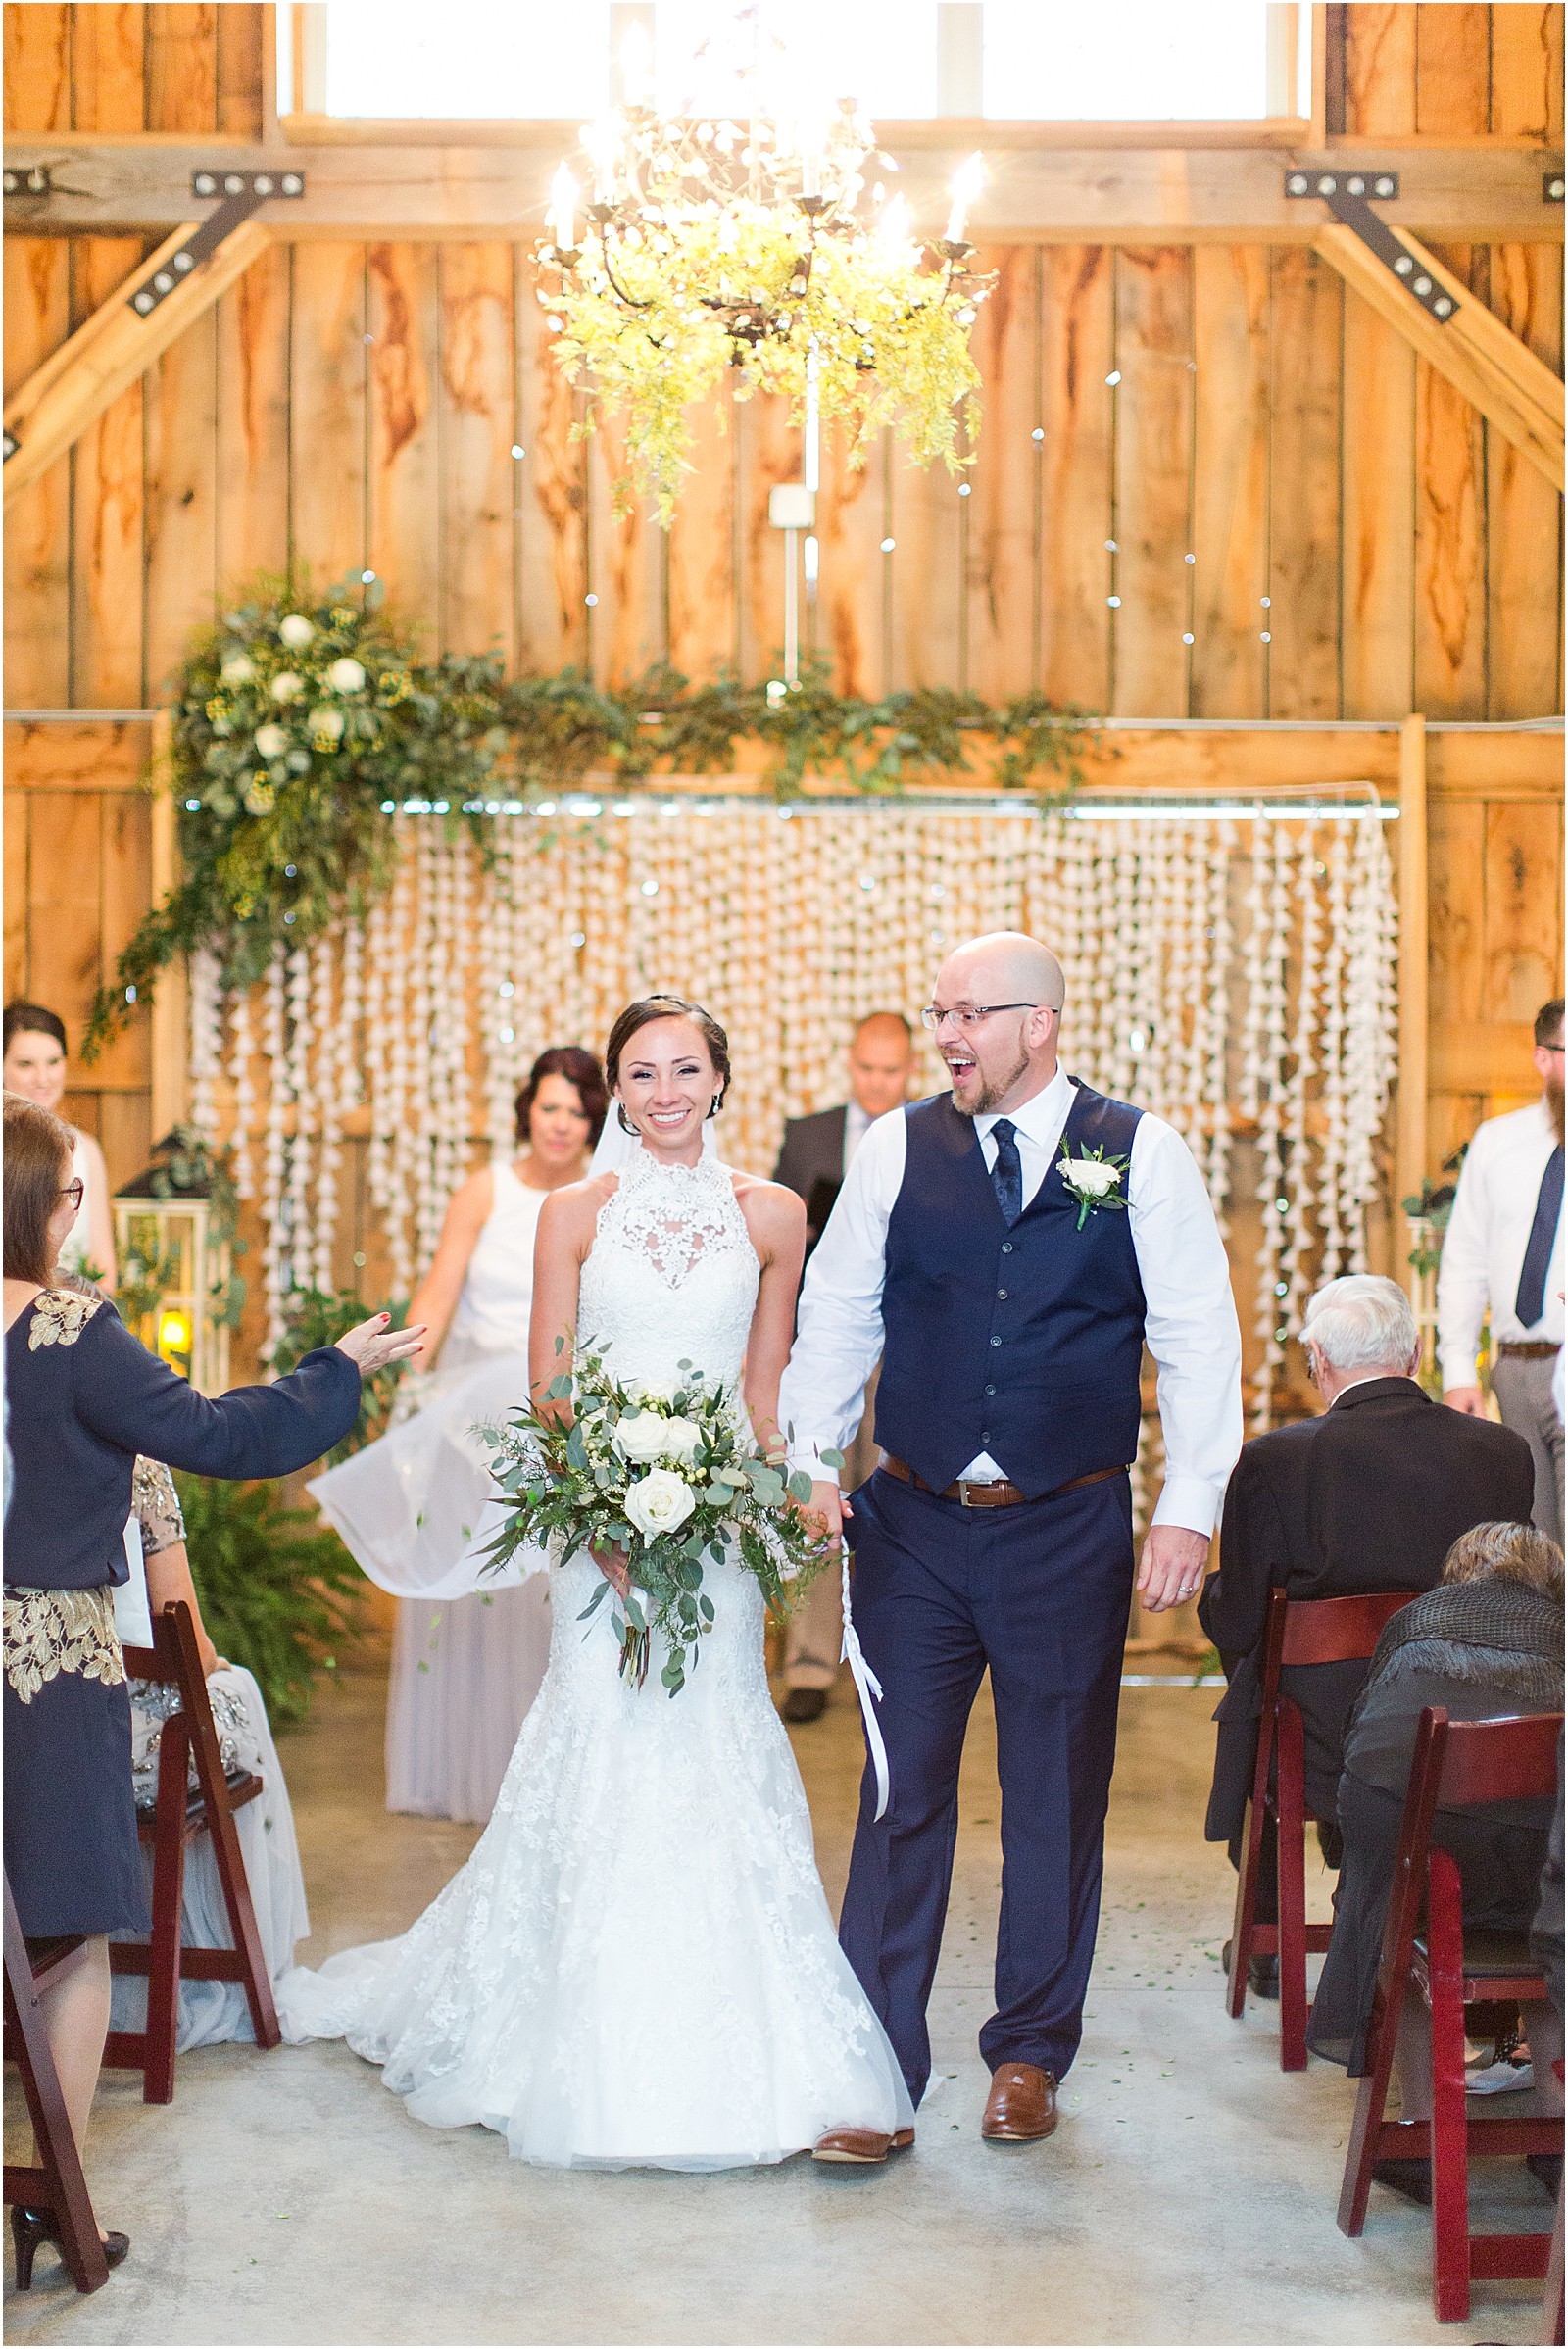 The Corner House Bed and Breakfast Wedding | Meagan and Michael117.jpg